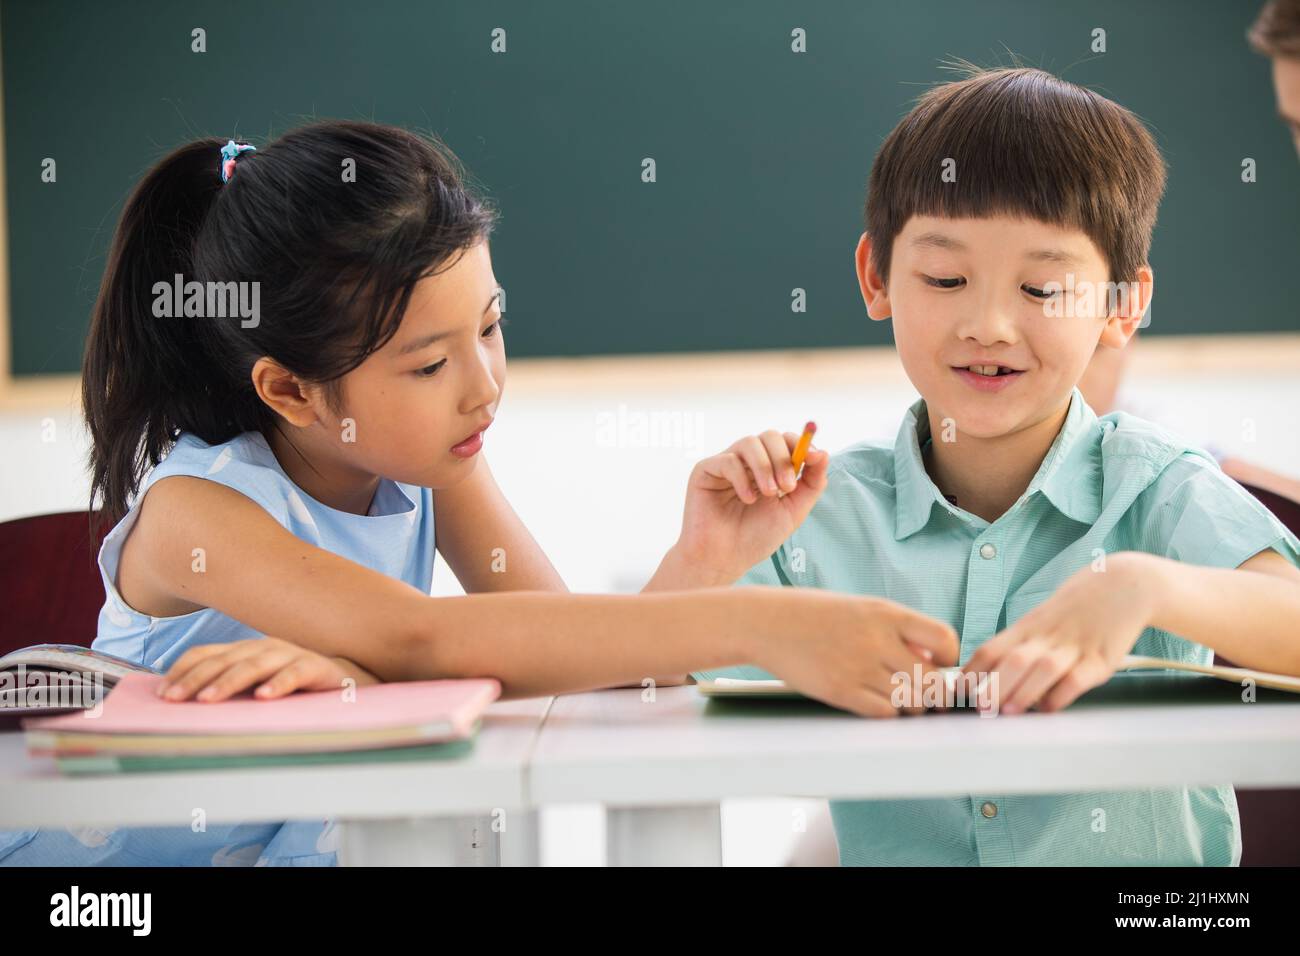 Elementary school students in the classroom learning Stock Photo